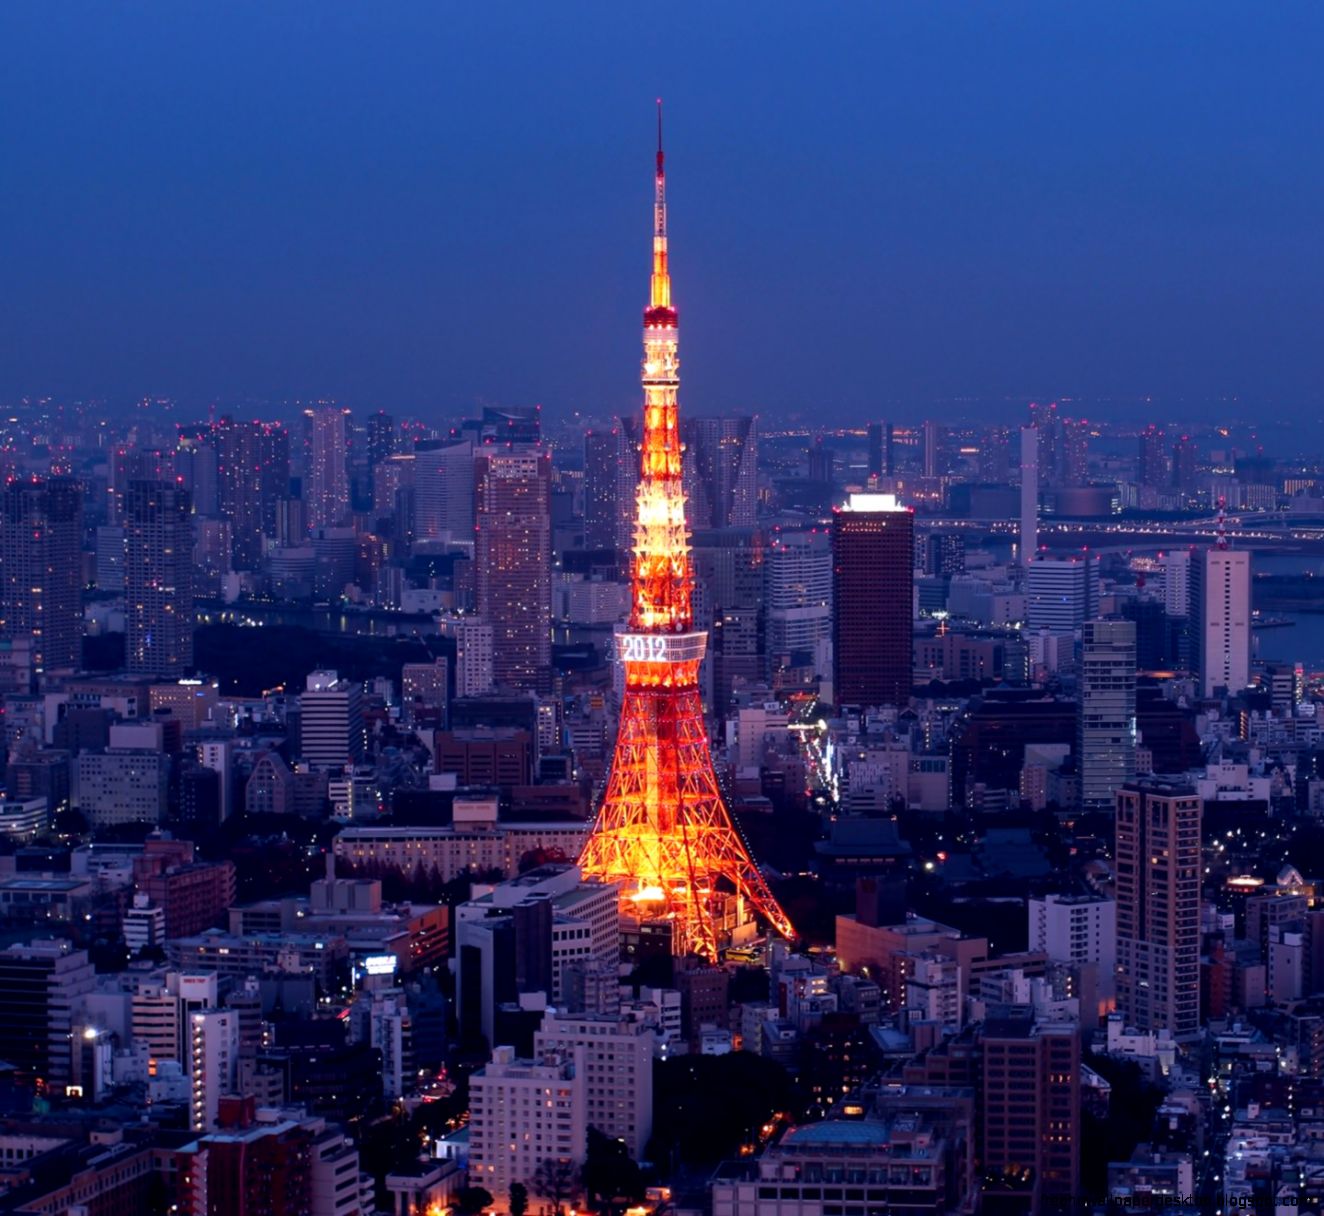 Tokyo Tower Wallpaper Landscape | Free High Definition Wallpapers